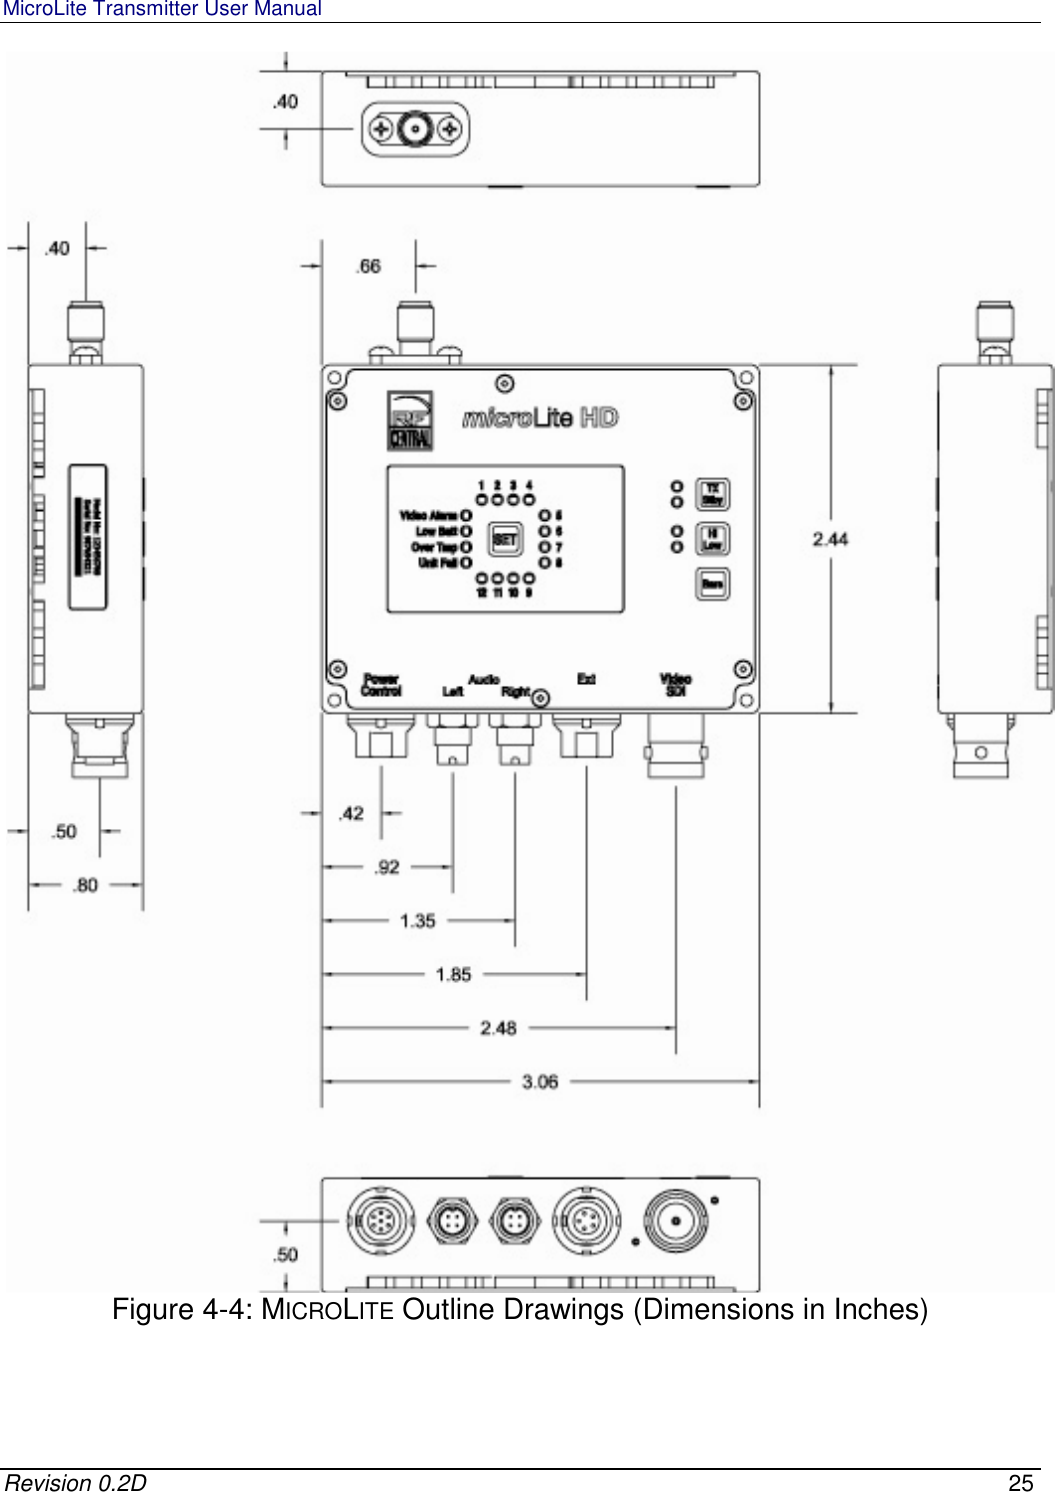 MicroLite Transmitter User Manual   Revision 0.2D    25  Figure 4-4: MICROLITE Outline Drawings (Dimensions in Inches)  